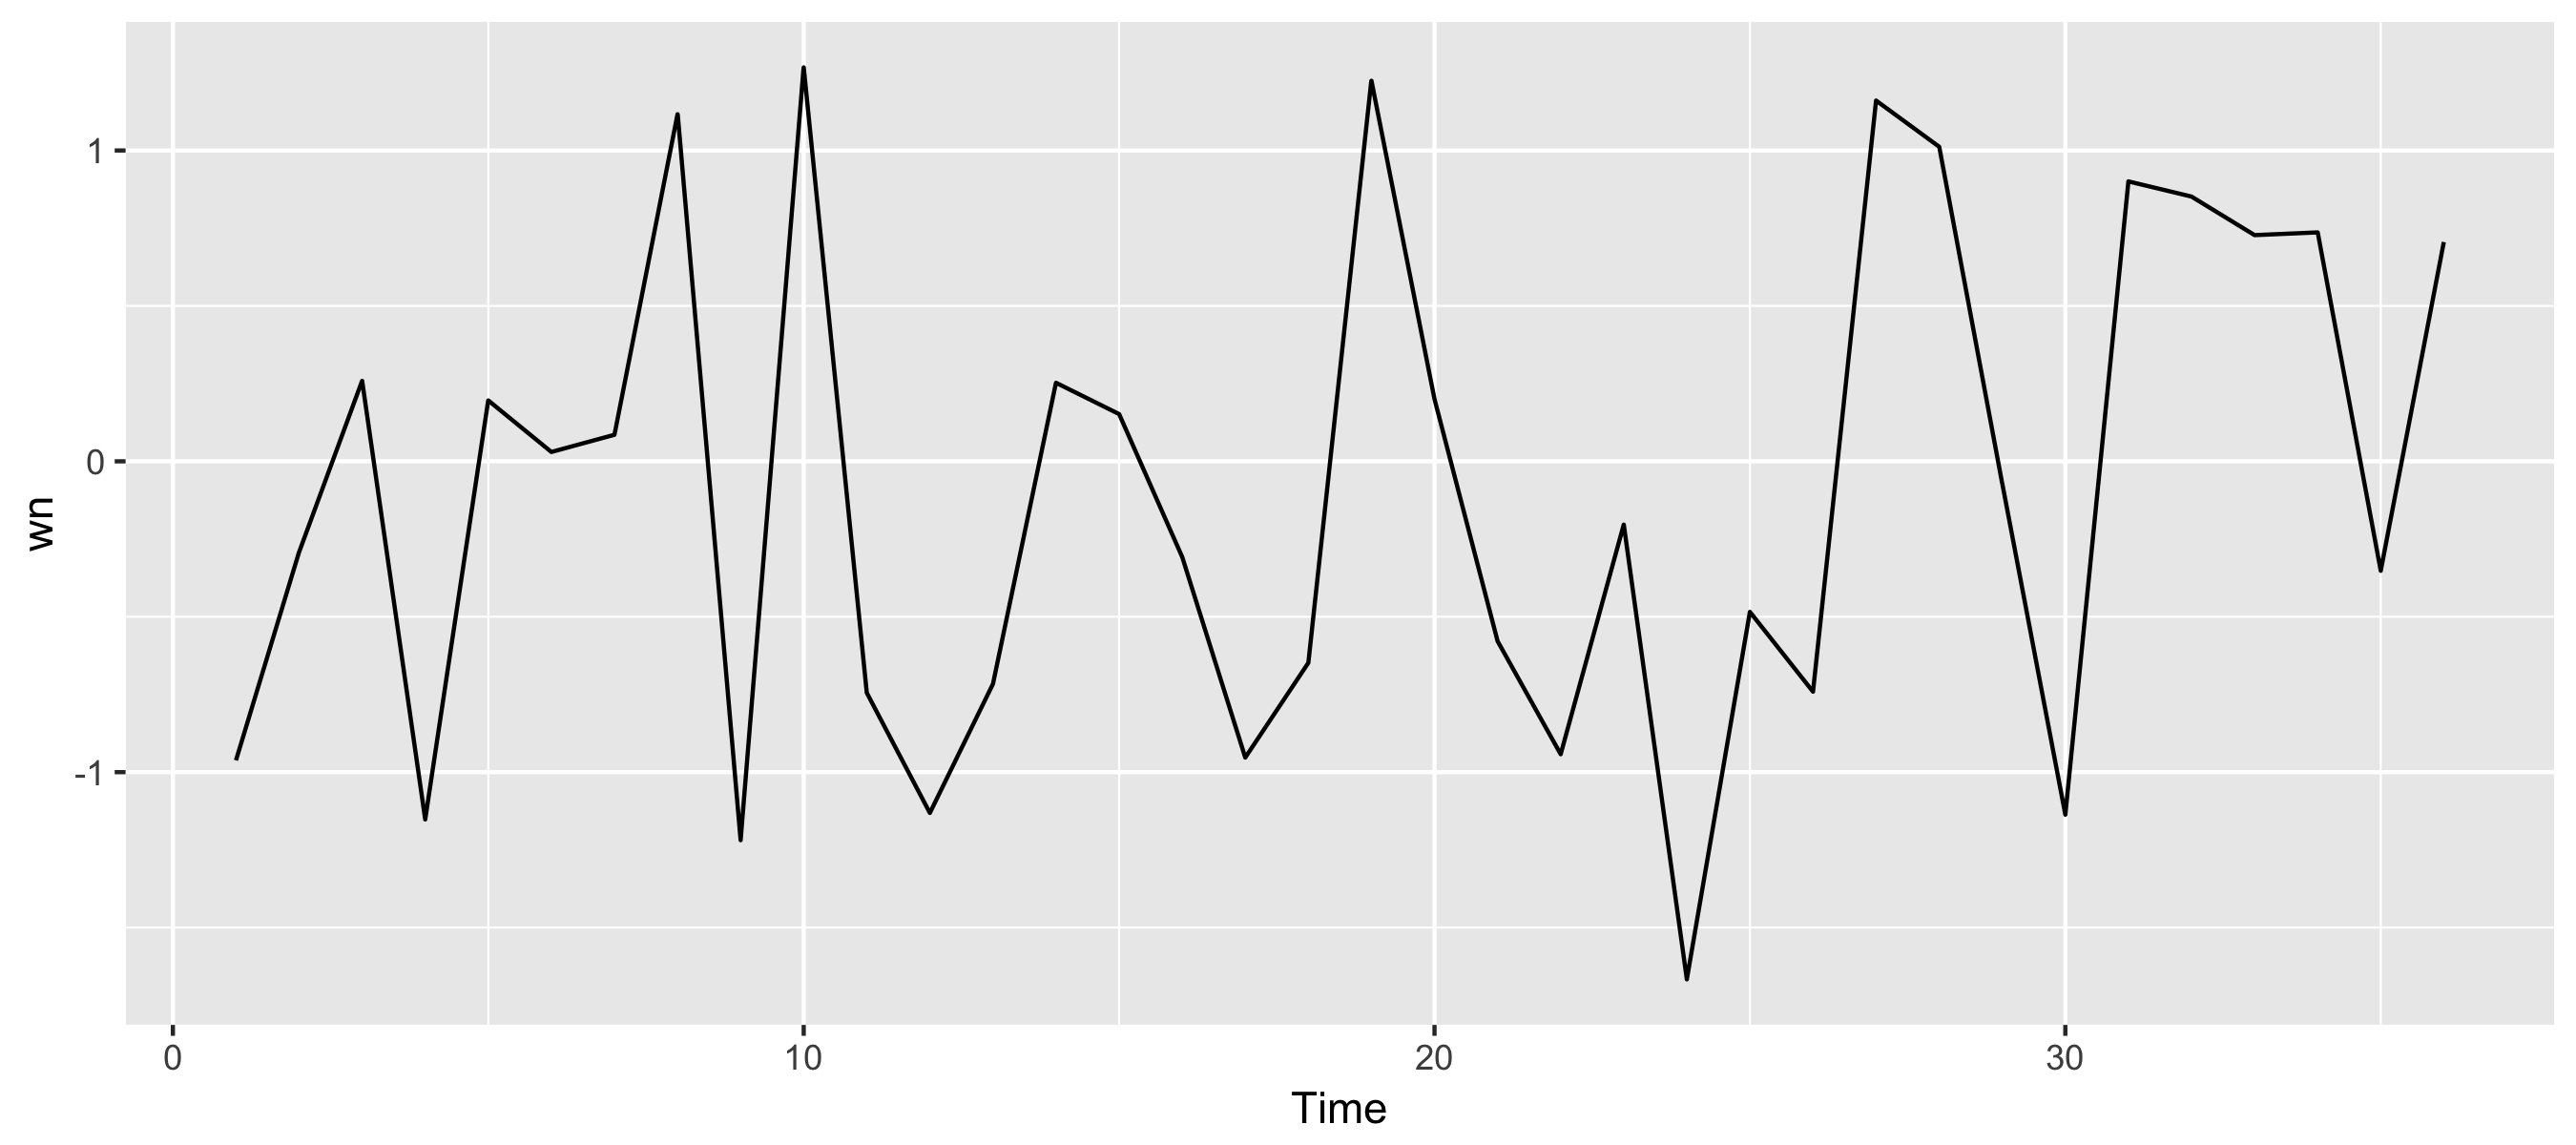 White Noise Time Series with Python 